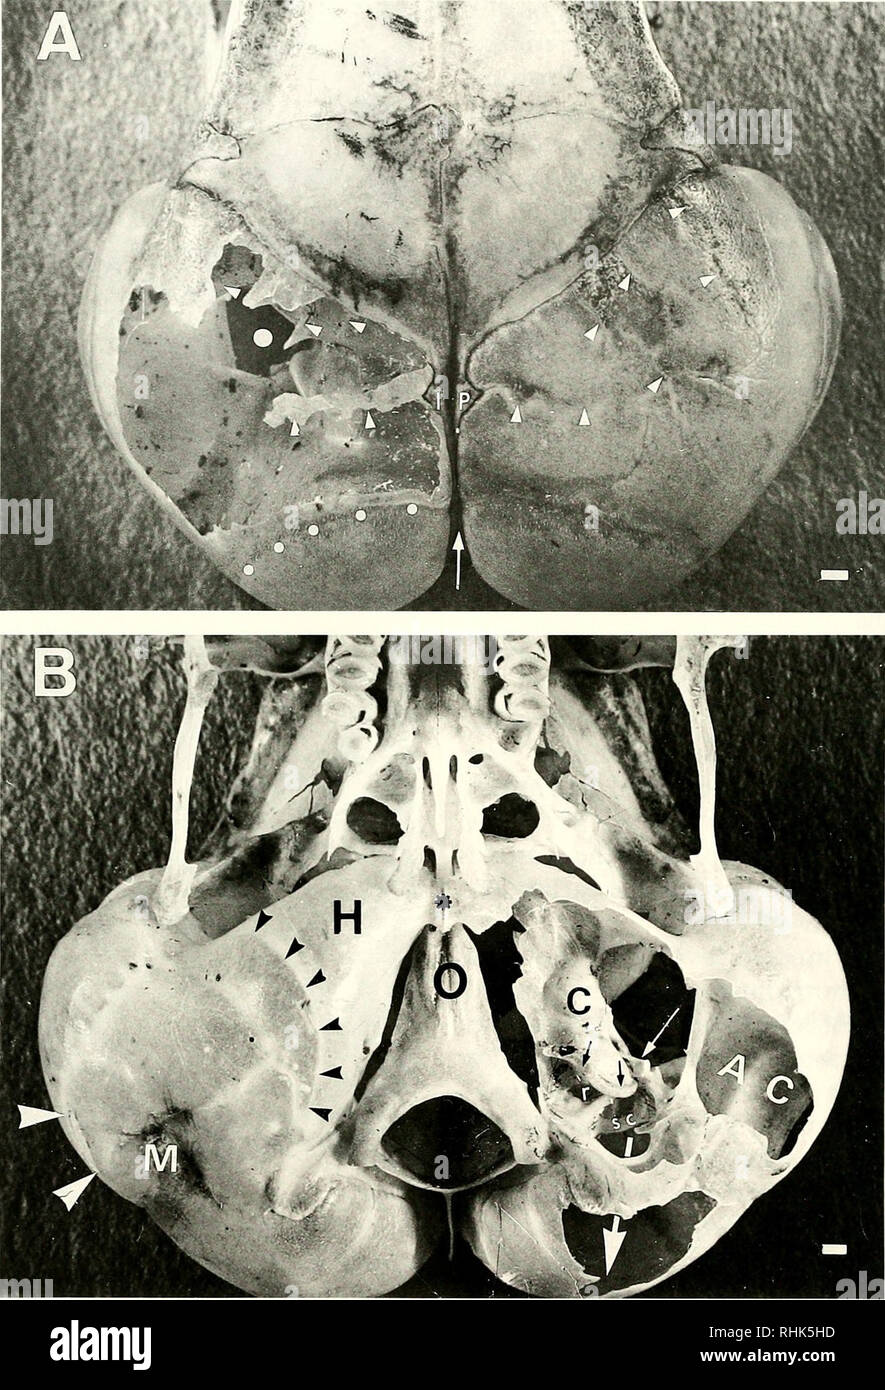 . Biology of the Heteromyidae. Heteromyidae. 272 LAY. Fig. 2. —Middle ear morphology of Dipodomys deserti DML 4637. A. Dorsal view. Arrowheads = buttresses between brain case and roof of epitympanum (left) and surface markings of buttresses on roof of epitympanum (right), large dot = opening between epitympanum and hypotympanum, small dots = partition between epitympanum and mastoid, arrow = occipital, IP = interparietal. B. Ventral view. AC = auditory canal opened ventrally, C = cochlea, H = hypotympanum, M = origin of sternocleidomastoid muscle, O = occipital, r = round window of cochlea, sc Stock Photo